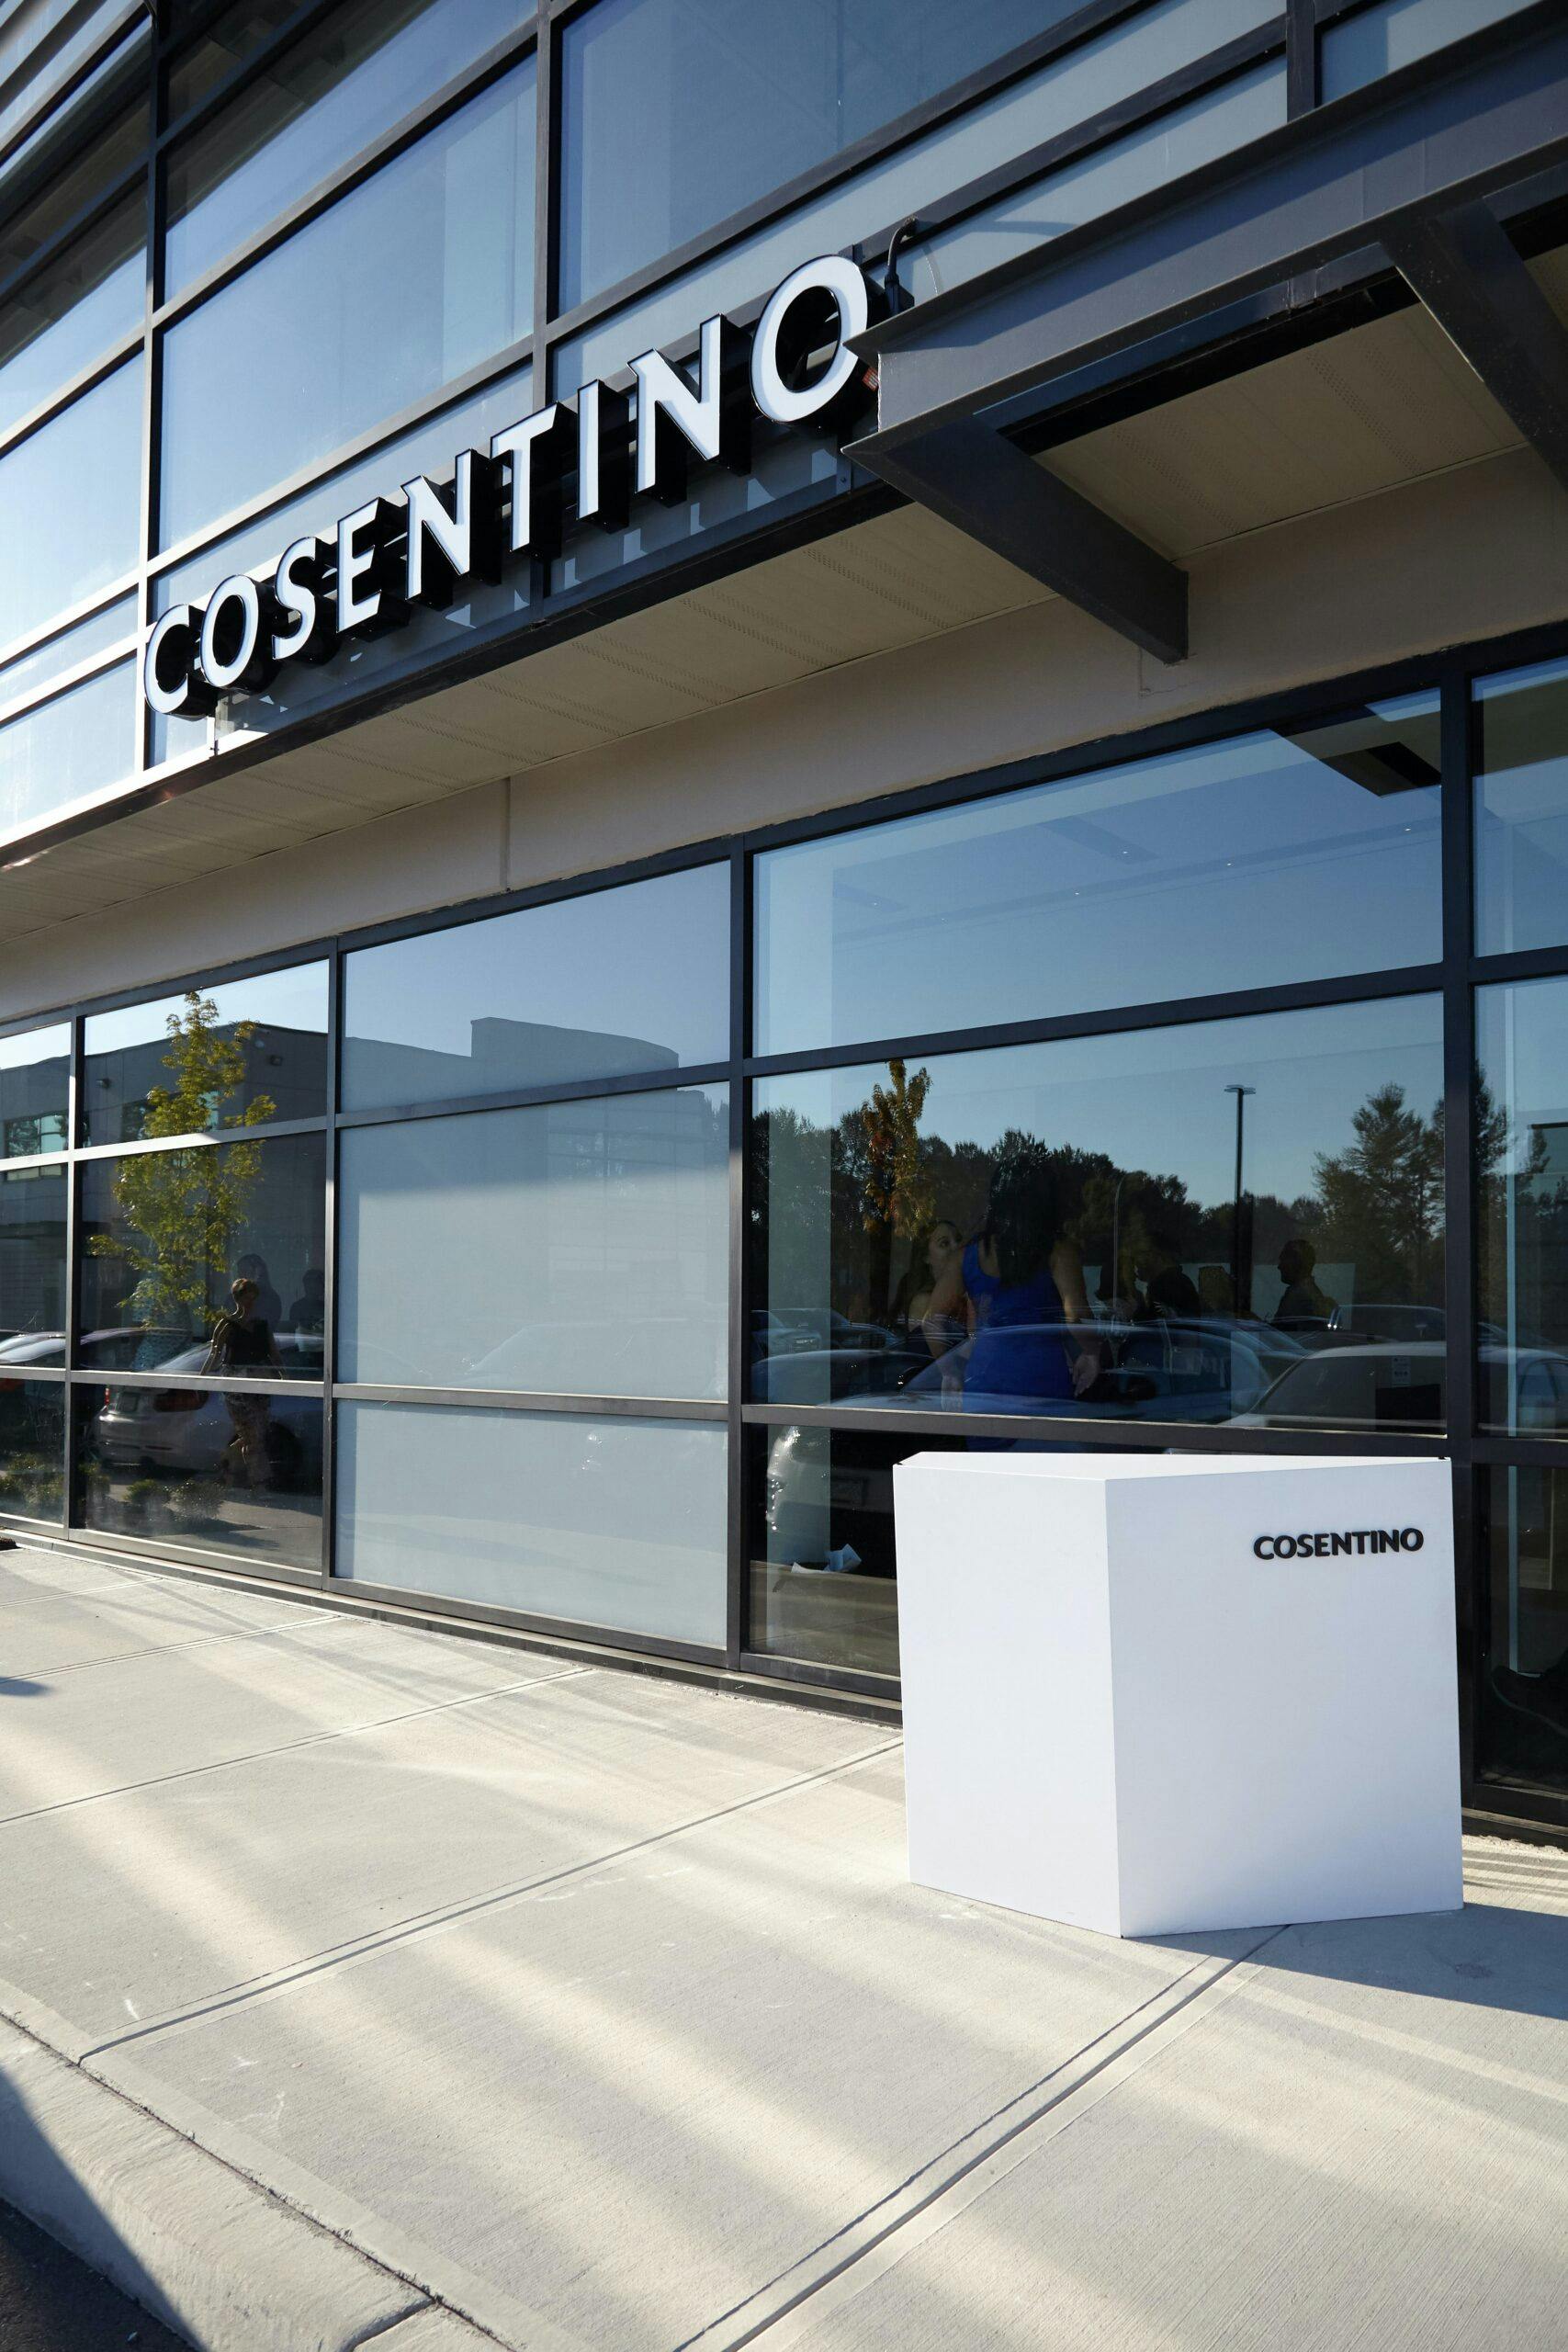 Image 34 of Cosentino Vancouver Center Opening 2018 4 1 scaled in Cosentino Officially Opens New Vancouver Centre Showroom - Cosentino